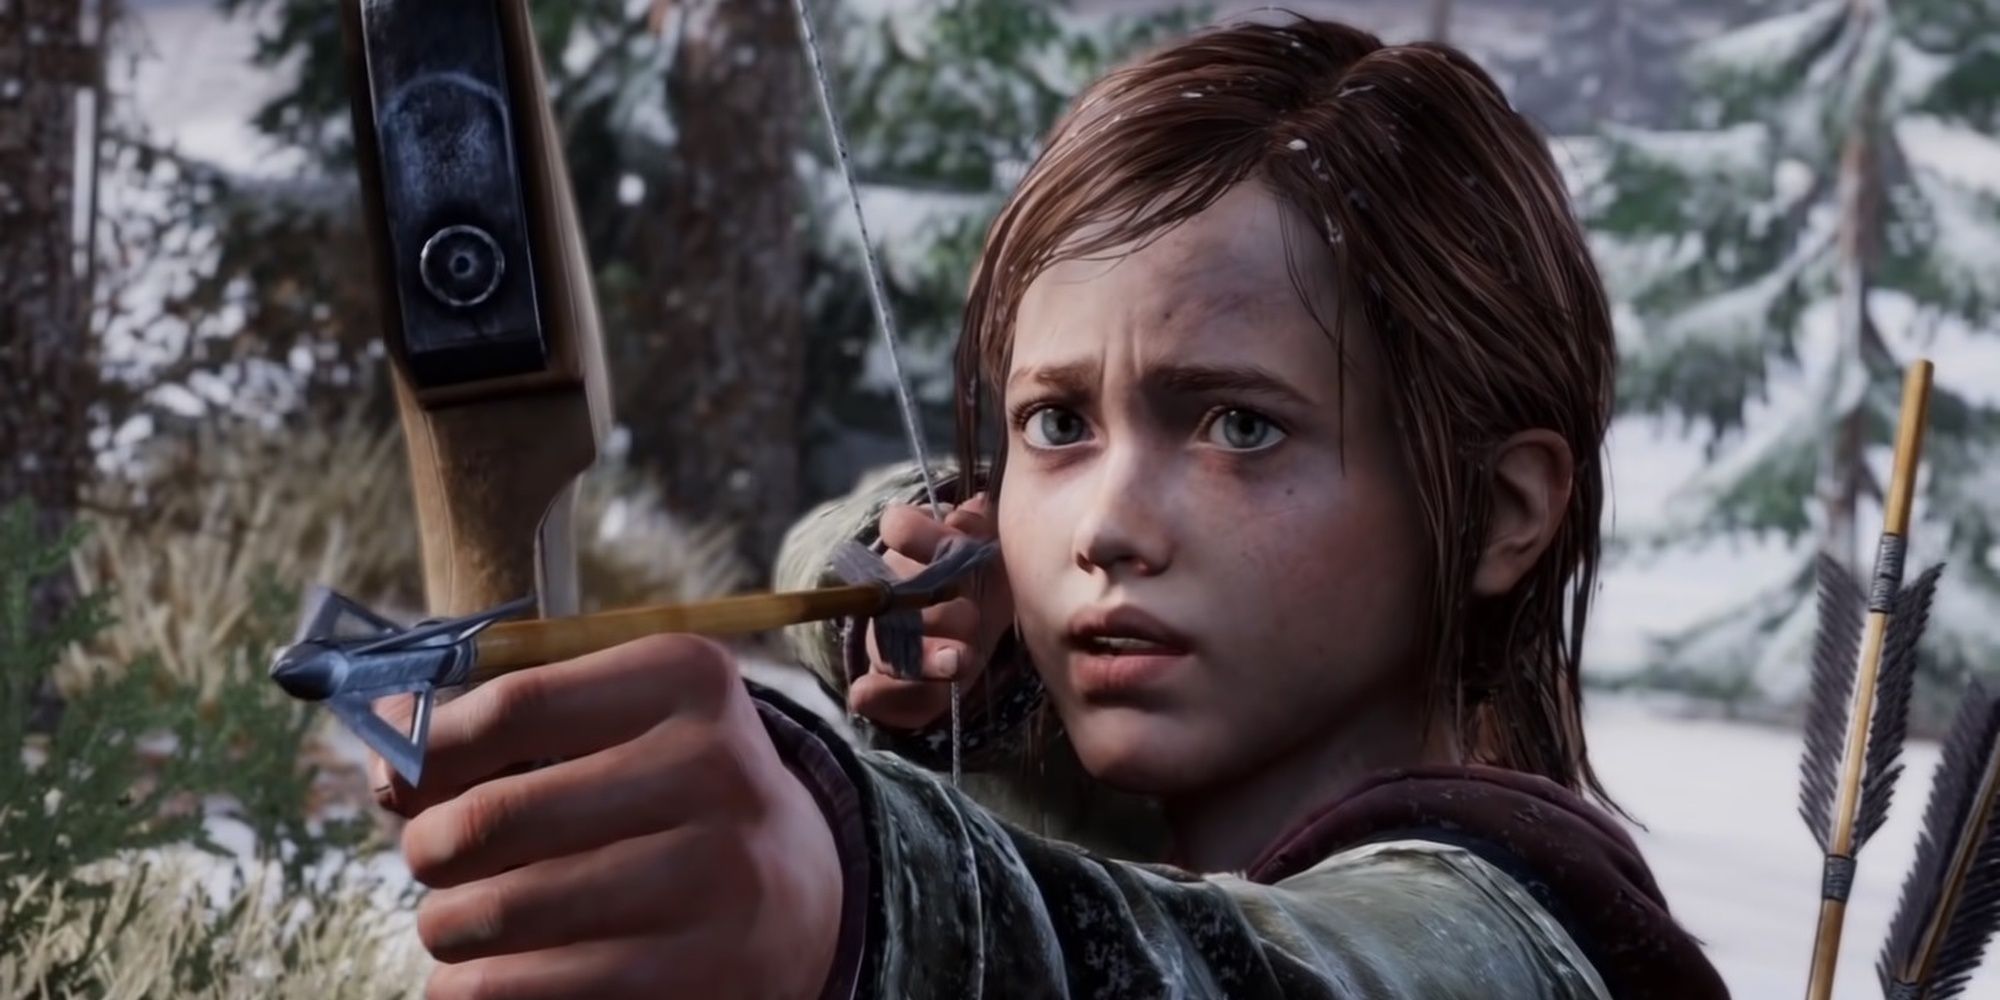 Ellie with her bow at David in The Last of Us